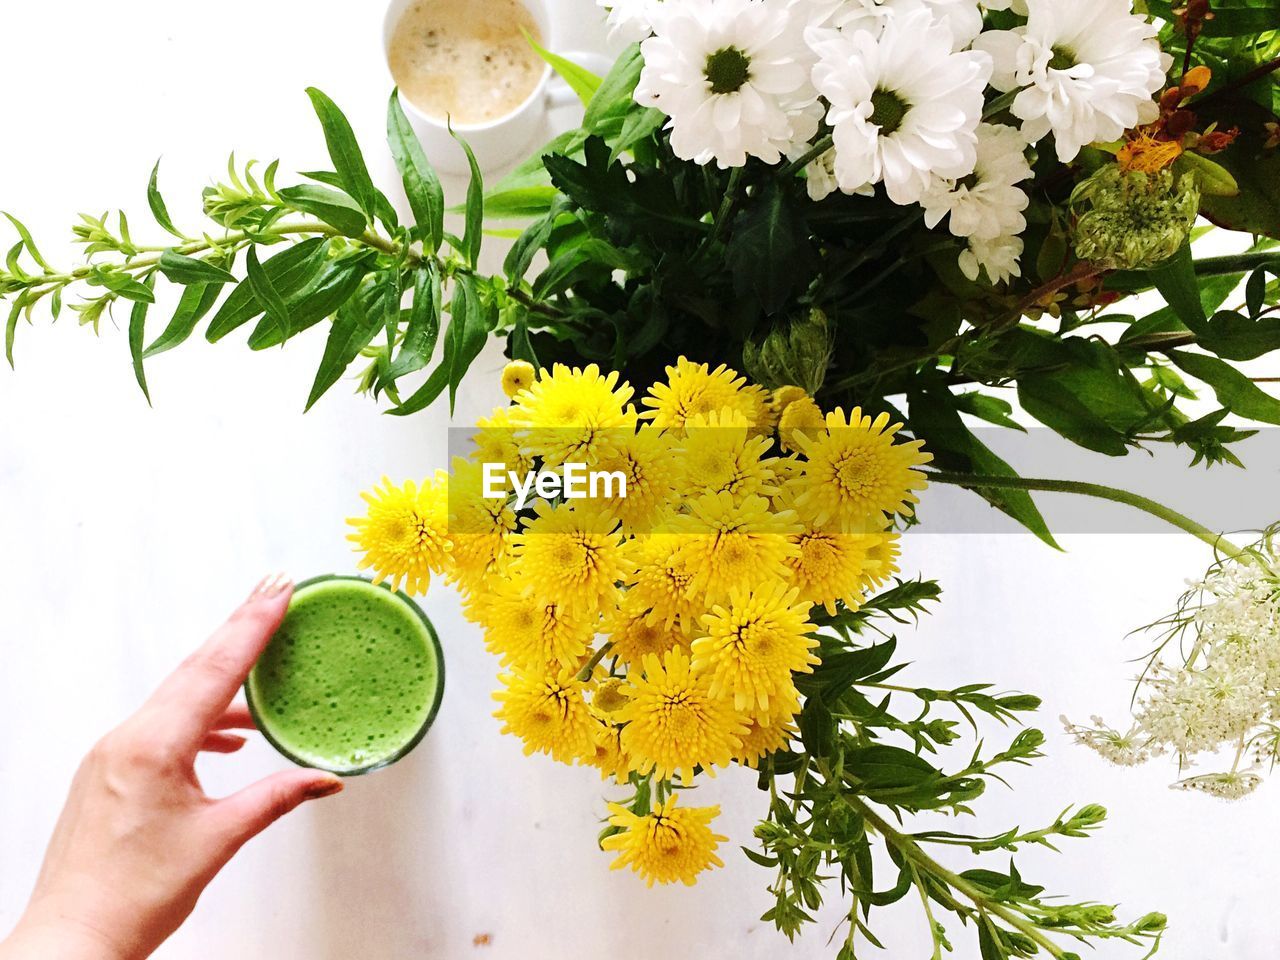 Cropped hand holding avocado smoothie by flowers on table